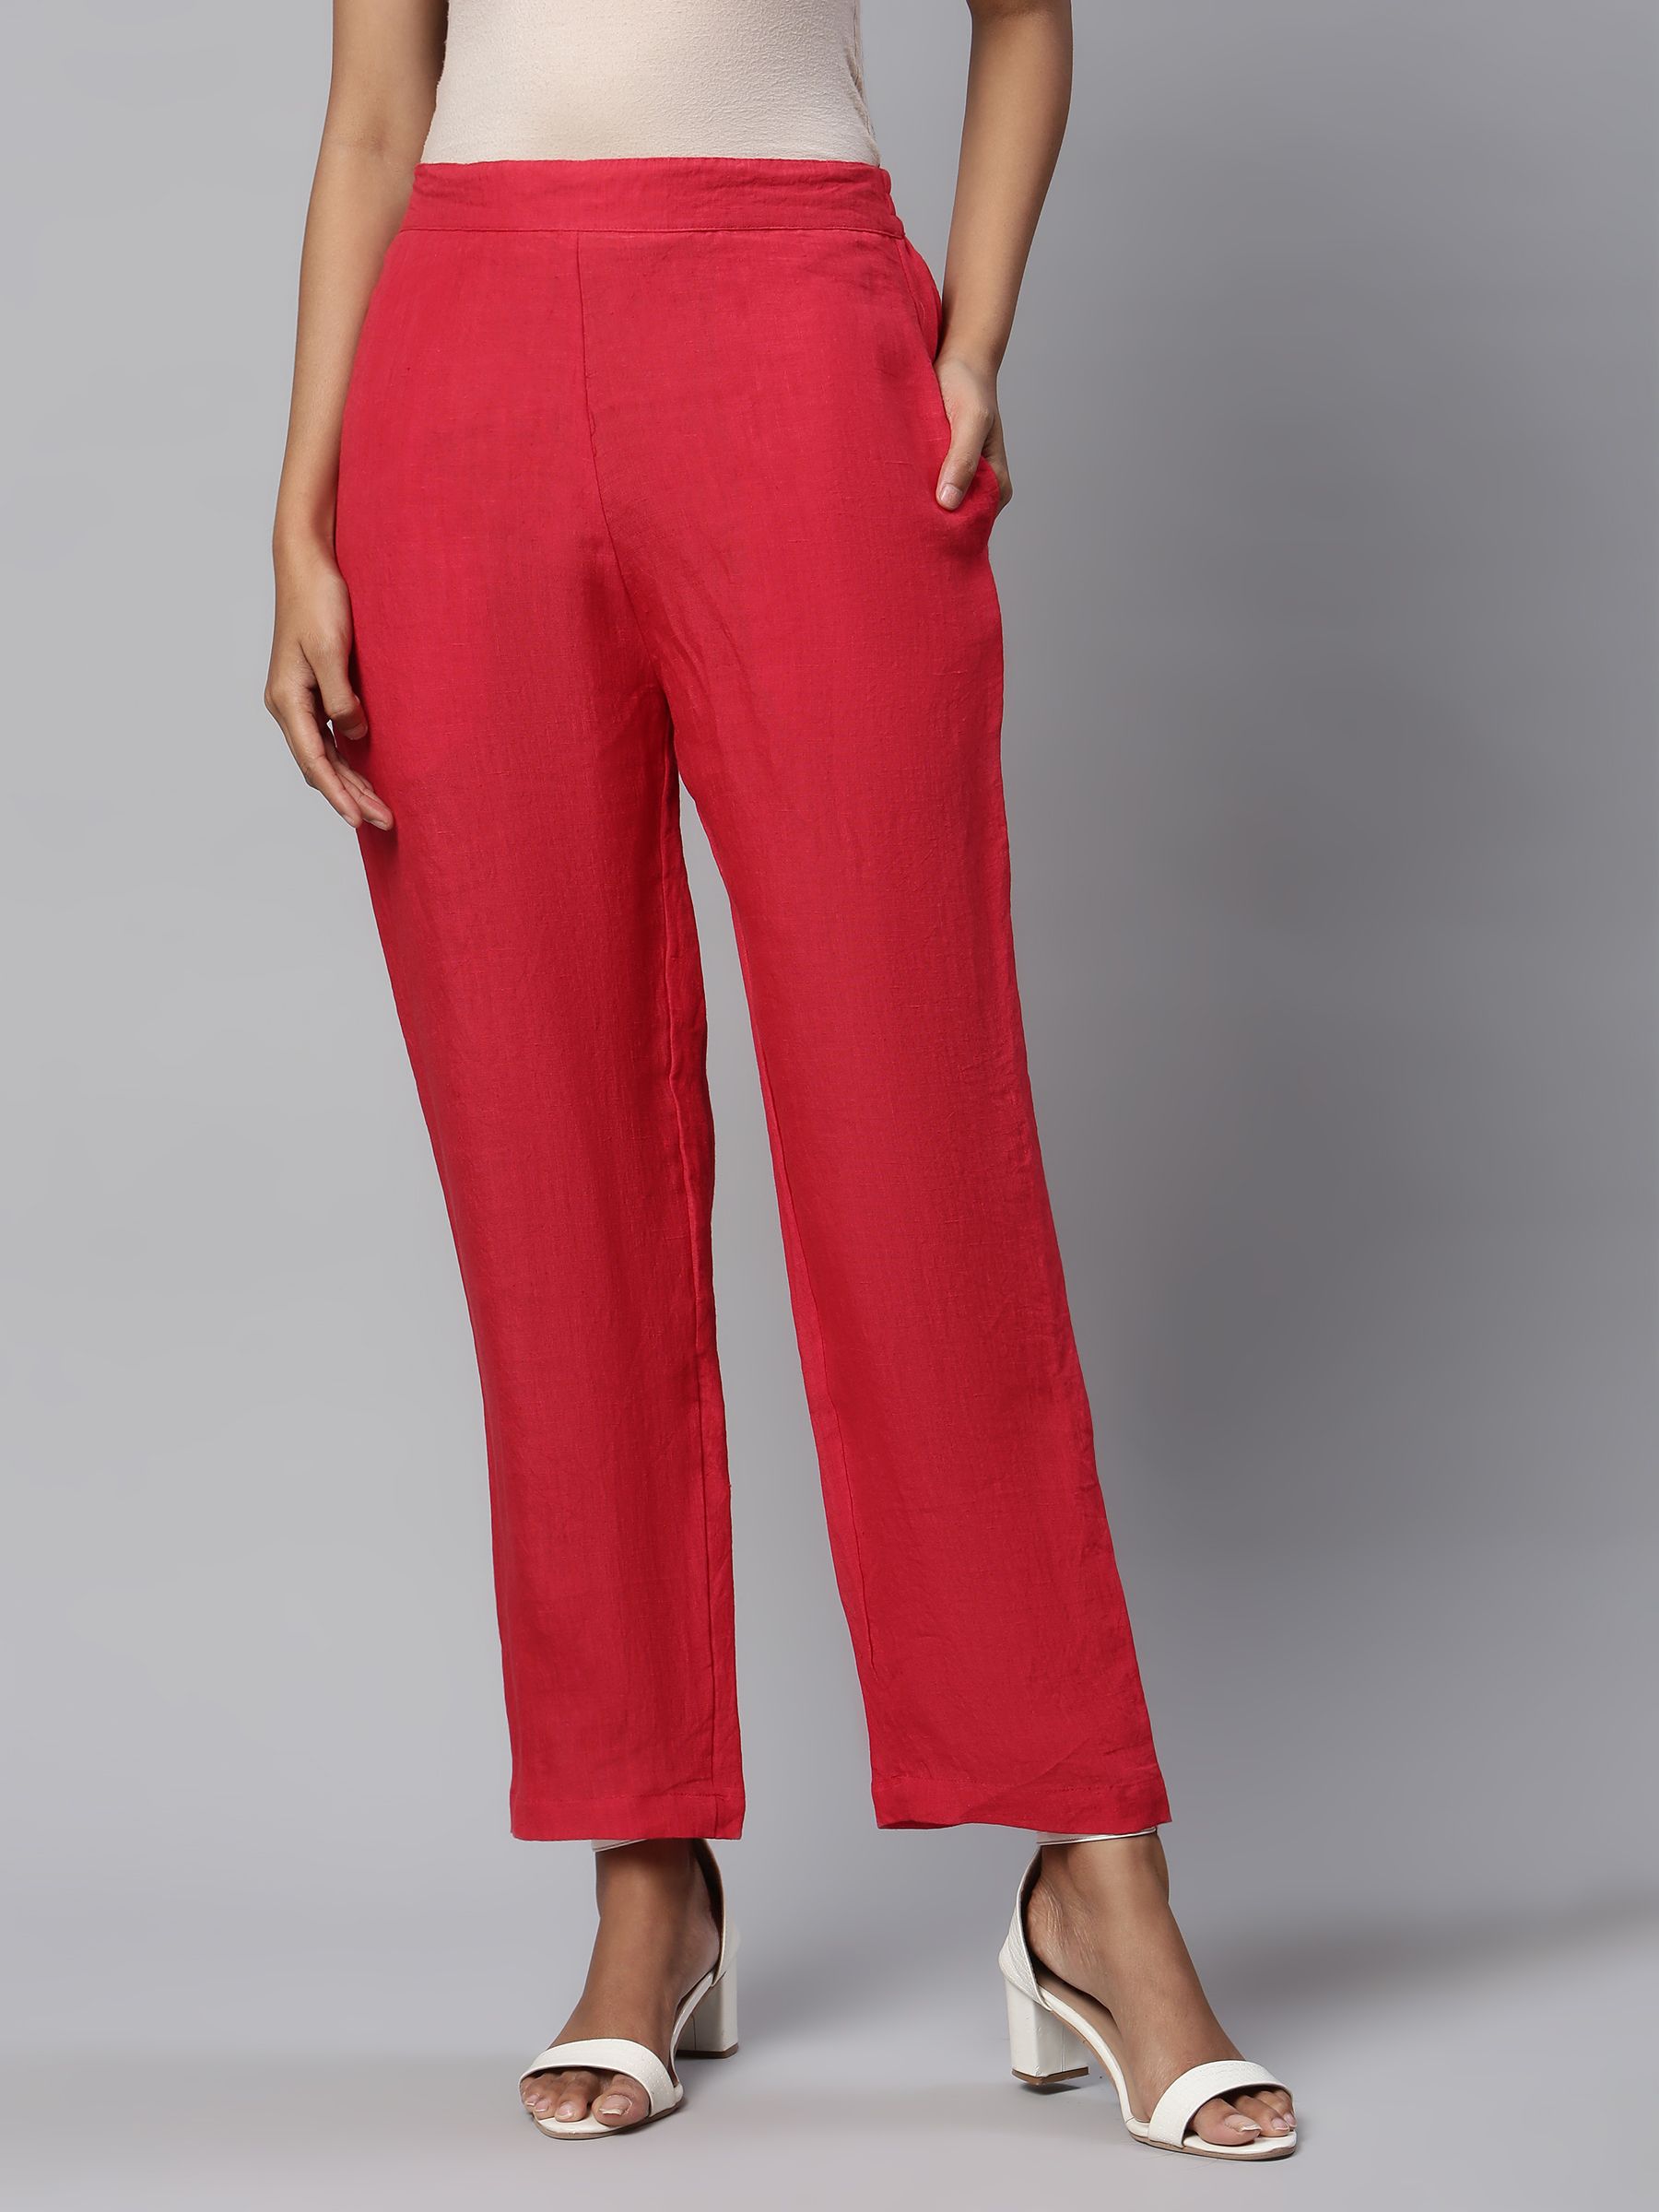 thread game Regular Fit Women Red Trousers - Buy thread game Regular Fit  Women Red Trousers Online at Best Prices in India | Flipkart.com